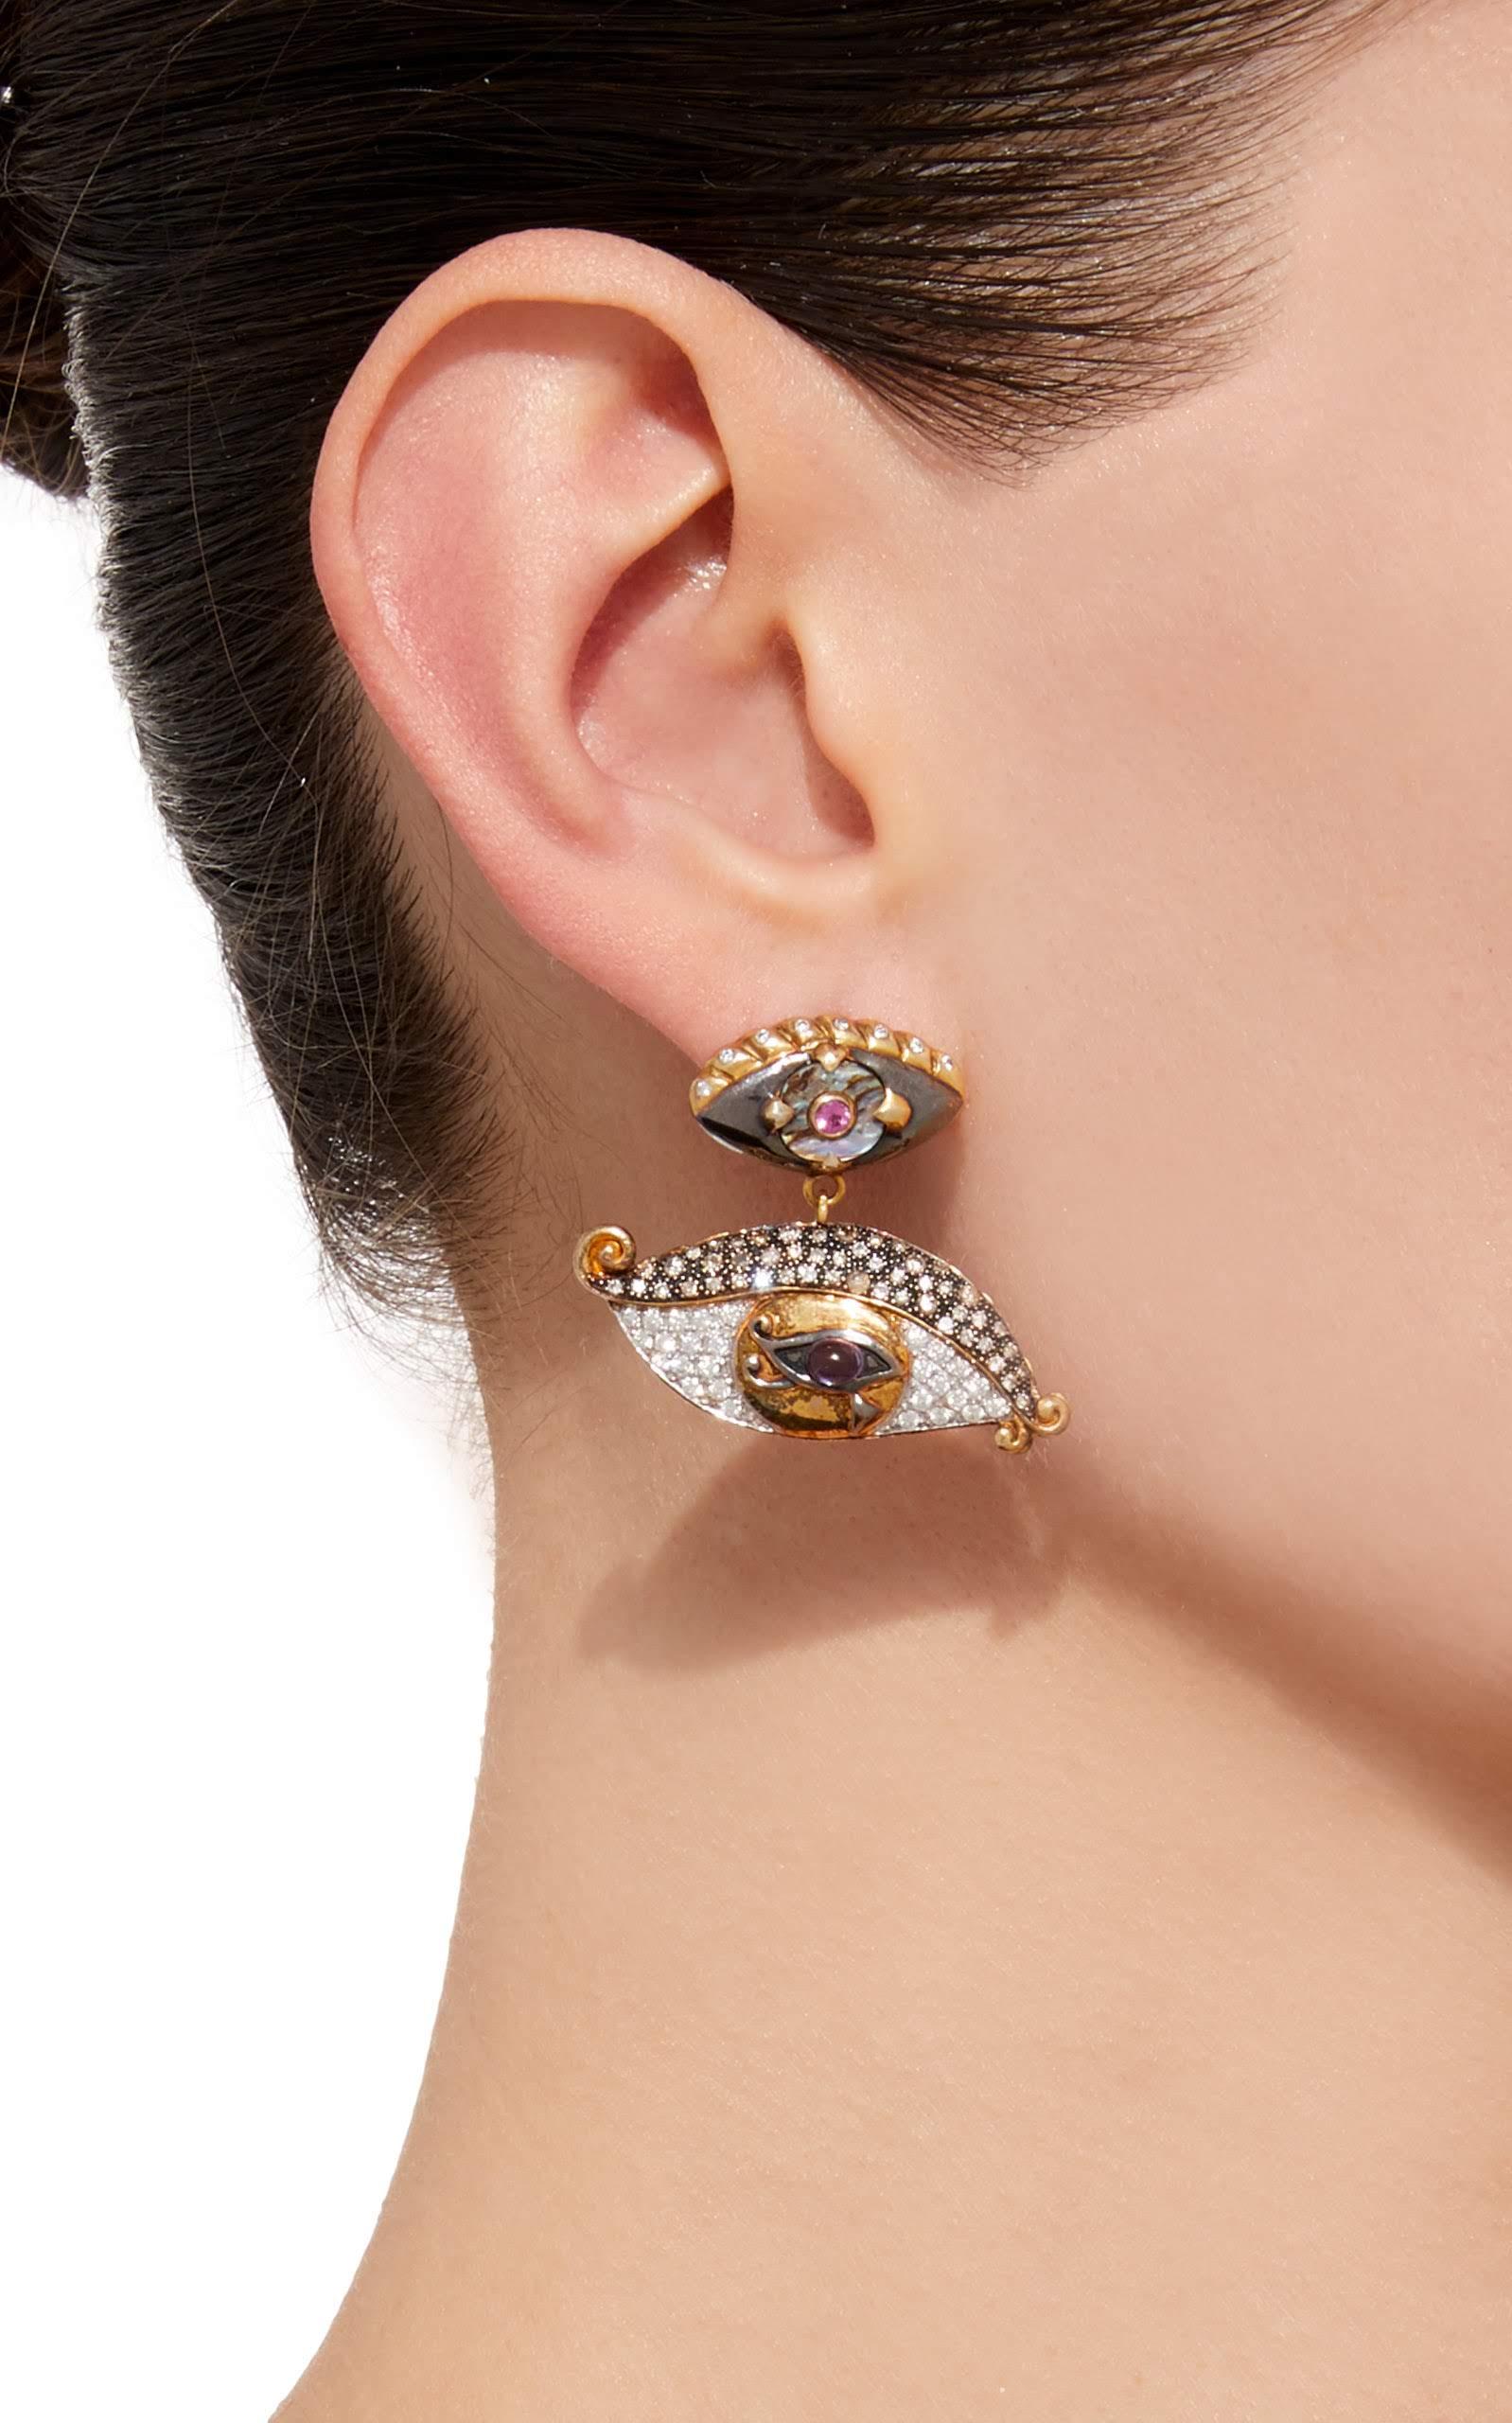 Egyptian Revival Sylvie Corbelin Unique Eye Shape Earrings in Gold and Silver with Diamonds For Sale